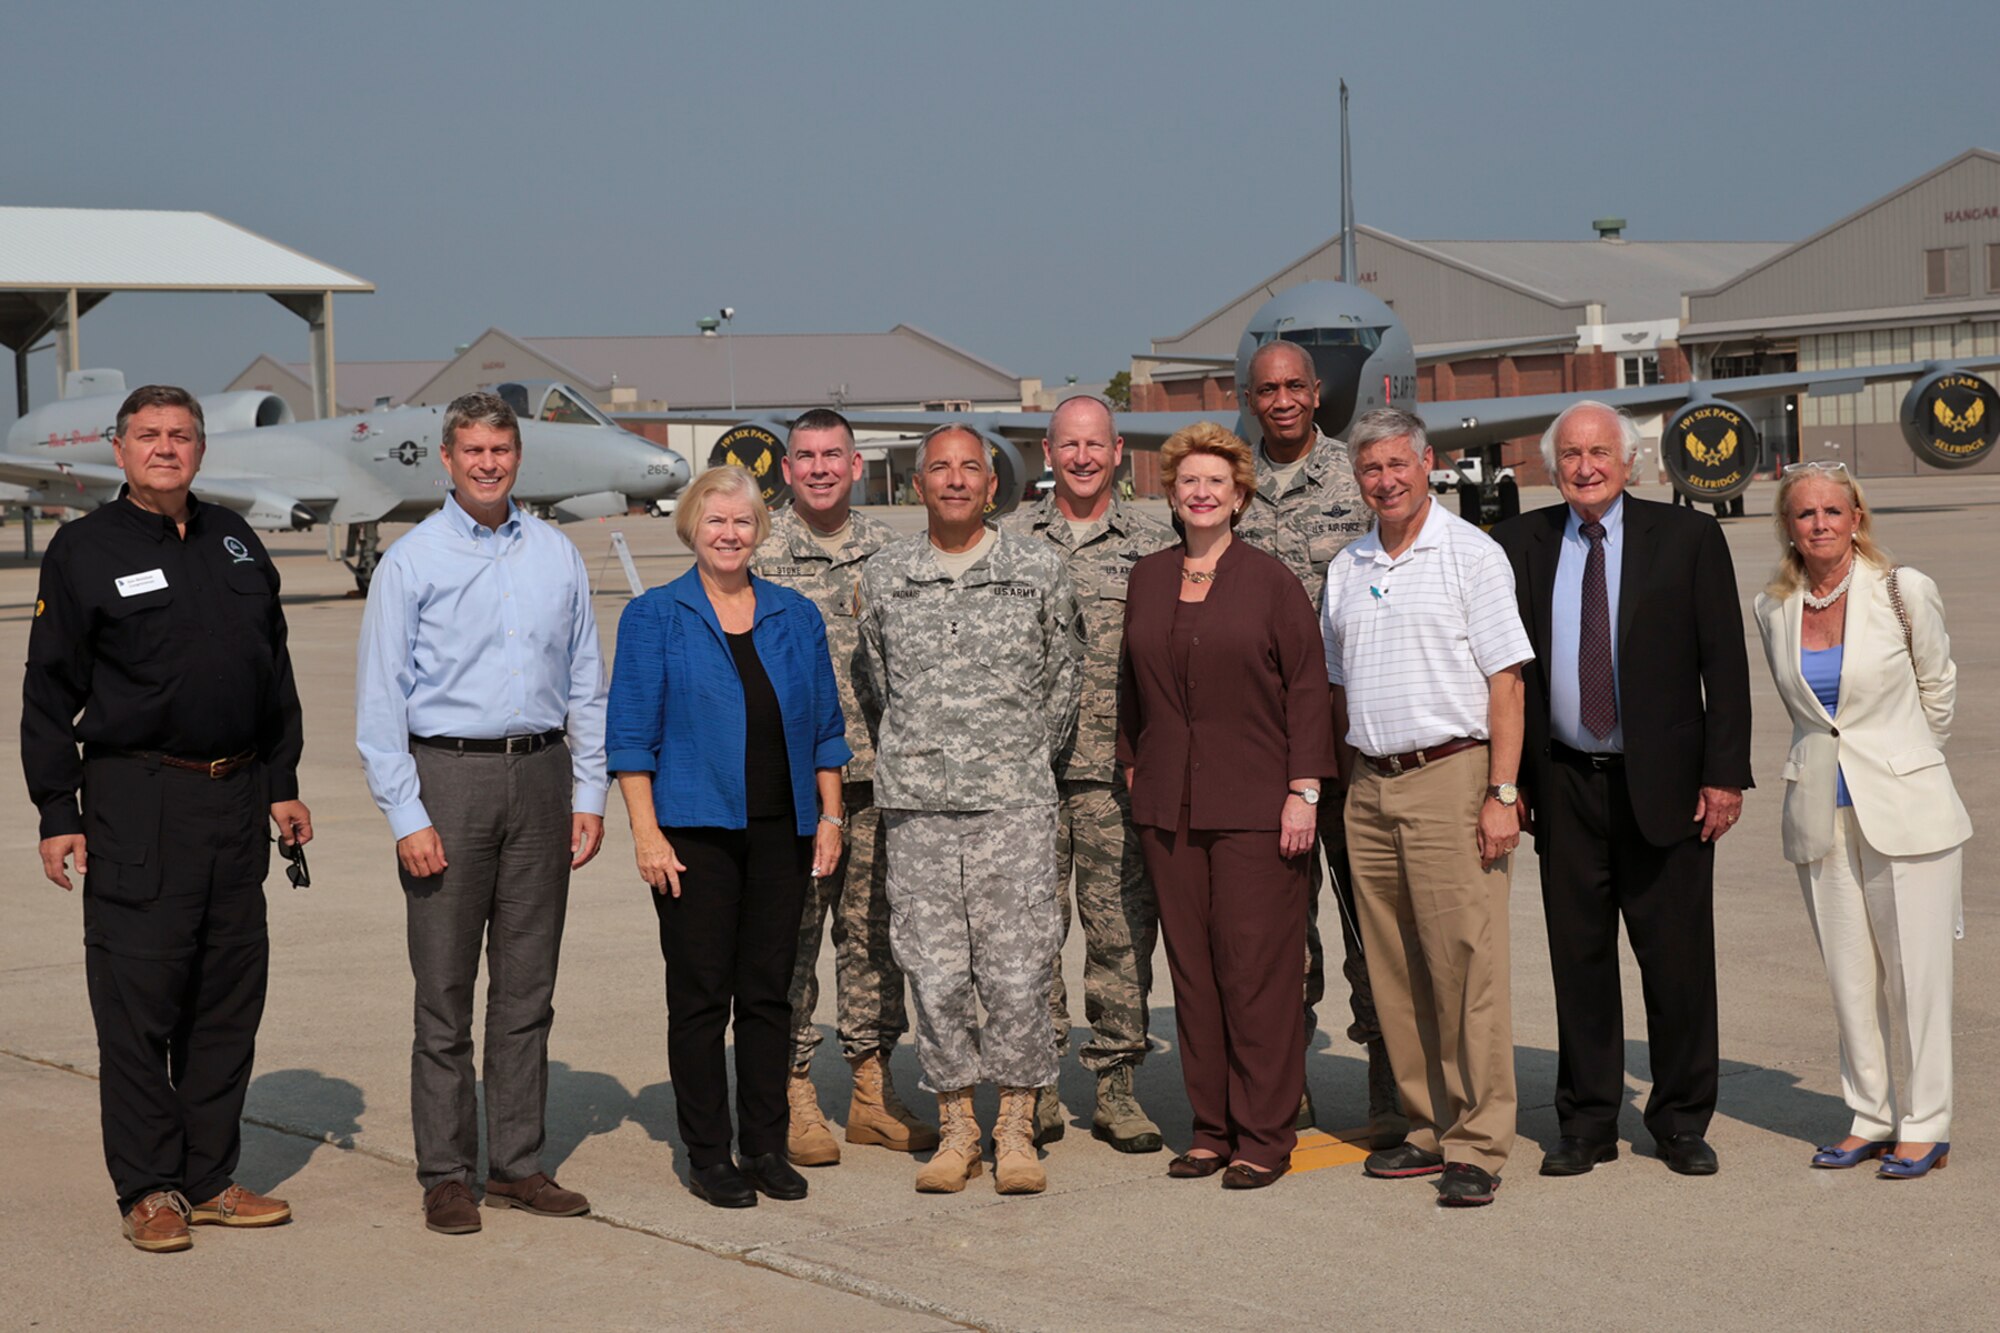 U.S. Rep. Dan Benishek, R-Mich., U.S. Rep. Bill Huizenga, R-Mich., U.S. Rep. Candice Miller, R-Mich., Major Gen. Gregory J. Vadnais, U.S. Sen. Debbie Stabenow, D-Mich., U.S. Rep. Fred Upton, R-Mich., U.S. Rep. Sander Levin, D-Mich., and U.S. Rep. Debbie Dingell, D-Mich., stand in front of an A-10 Thunderbolt II and KC-135 Stratotanker aircraft at Selfridge Air National Guard Base, Mich., Sept. 2, 2015. Vadnais is the adjutant general of the Michigan National Guard. Standing in the back row are Brig. Gen. Michael A. Stone, assistant adjutant general of Michigan for installations; Brig. Gen. John D. Slocum, 127th Wing commander; and Brig. Gen. Leonard W. Isabelle, commander of the Michigan Air National Guard. Both aircraft are operated by the 127th Wing at Selfridge. The Congressional members toured the base to learn about the capabilities and missions of the 40-plus units assigned to Selfridge. (U.S. Air National Guard photo by Terry Atwell / Released)